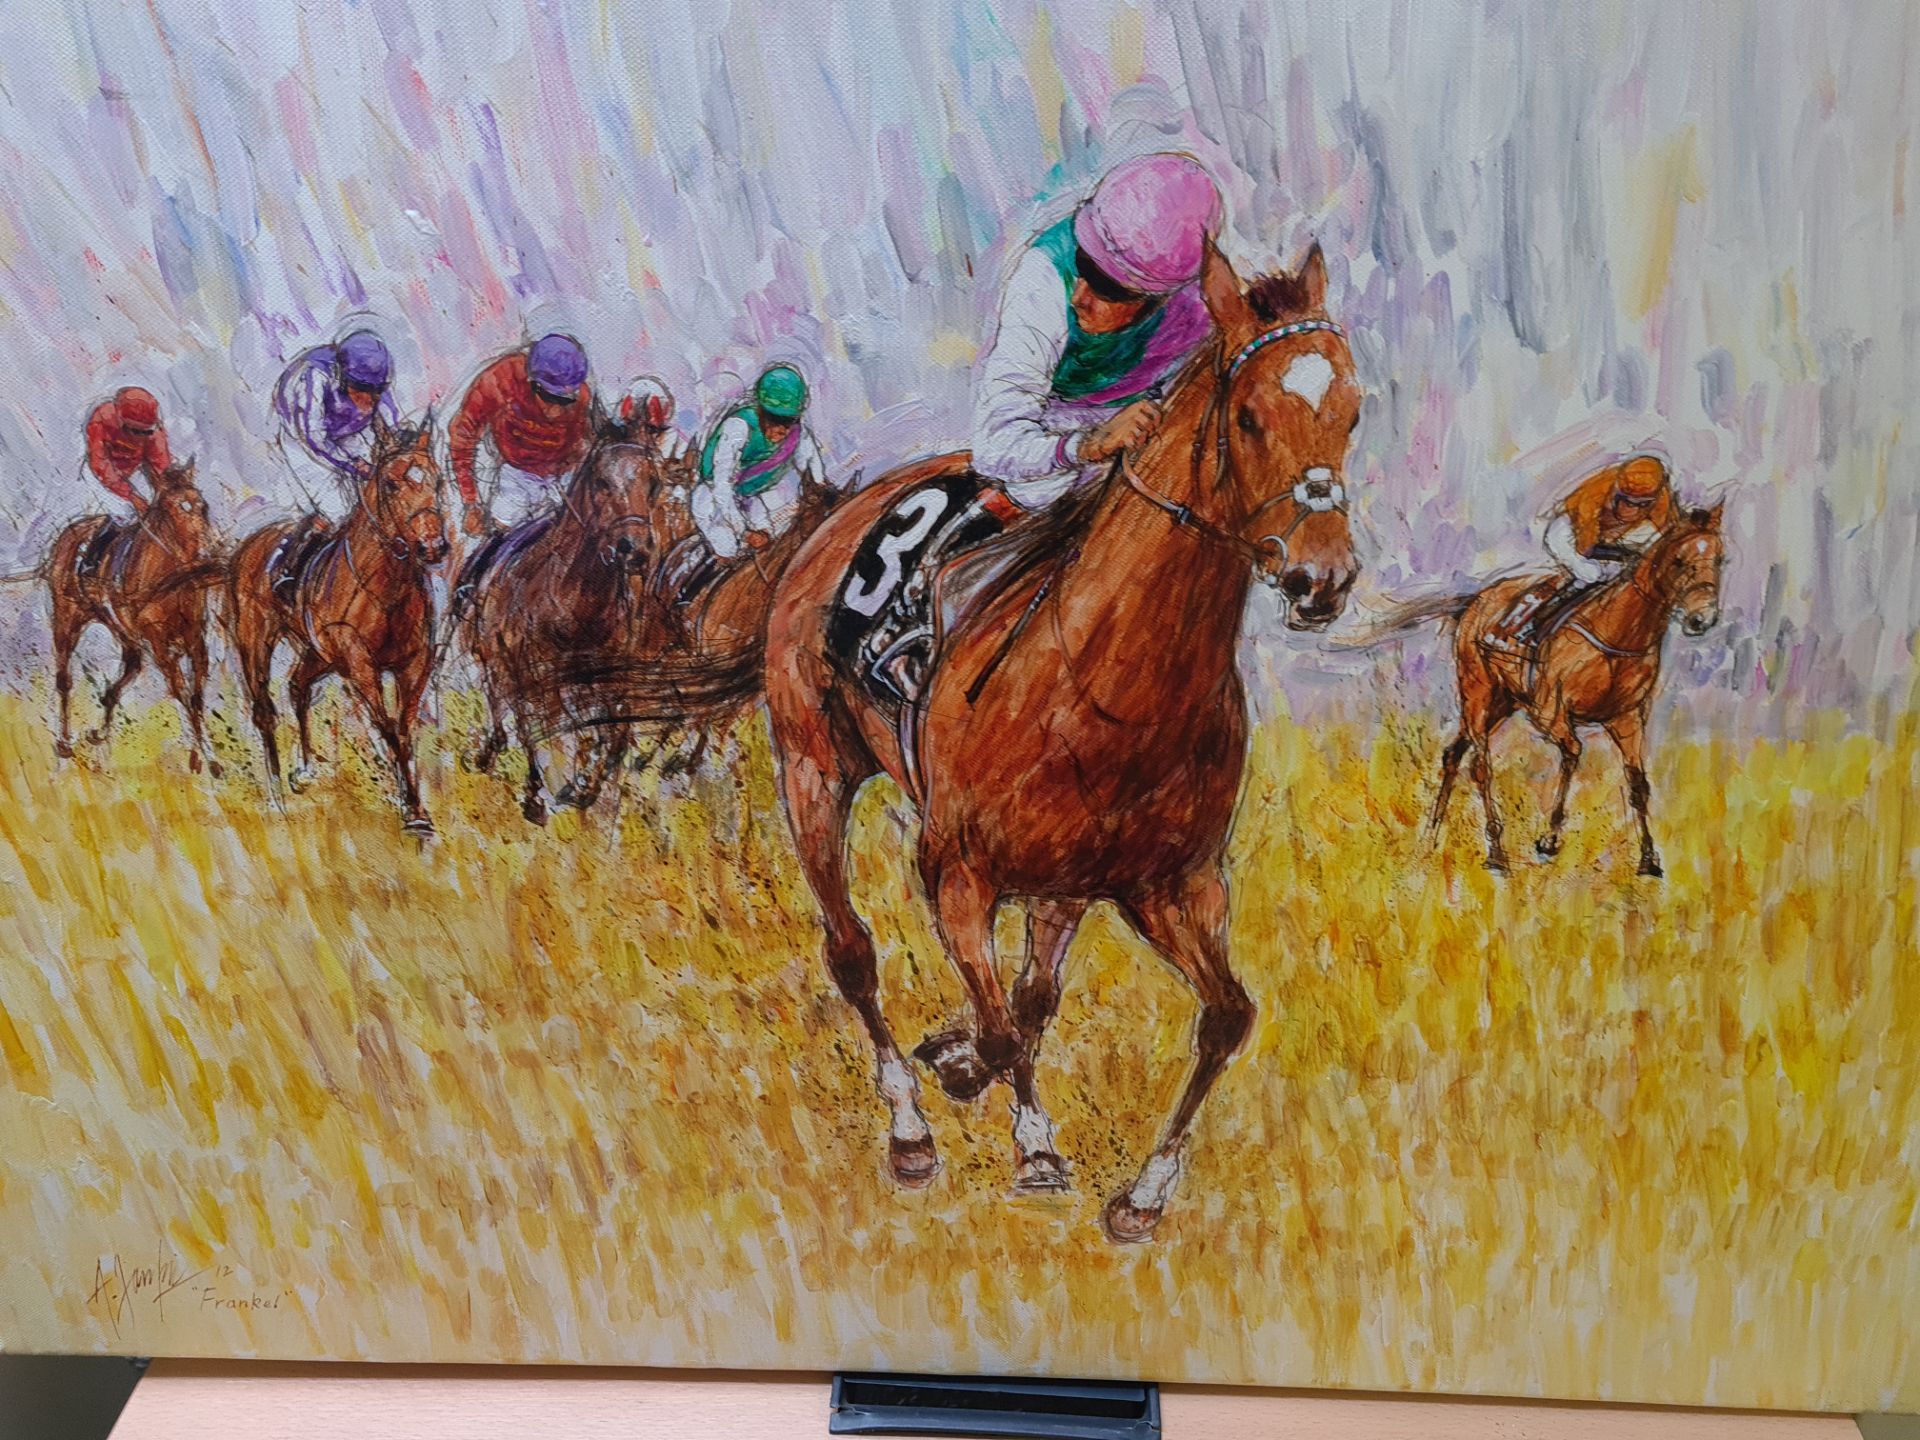 Signed Oil on Canvas Painting of Frankel, 24" x 36" - Image 2 of 3